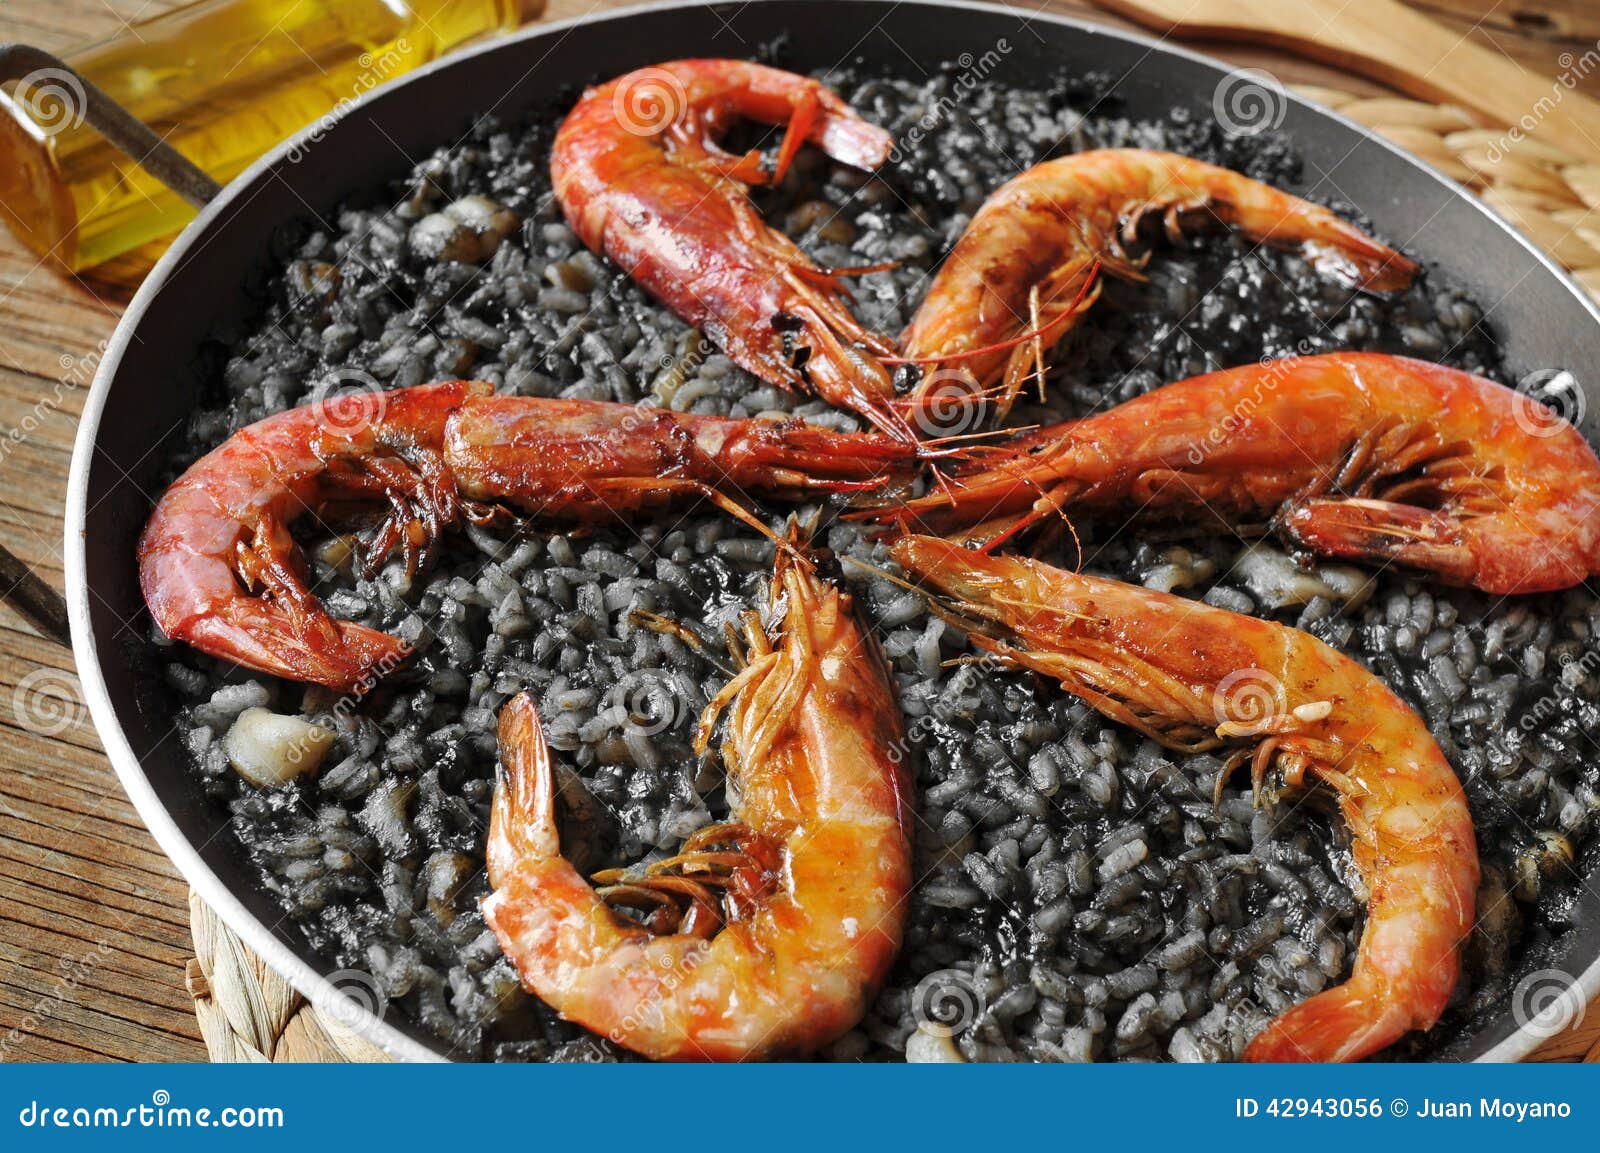 spanish arroz negro, a typical rice casserole made with squid in